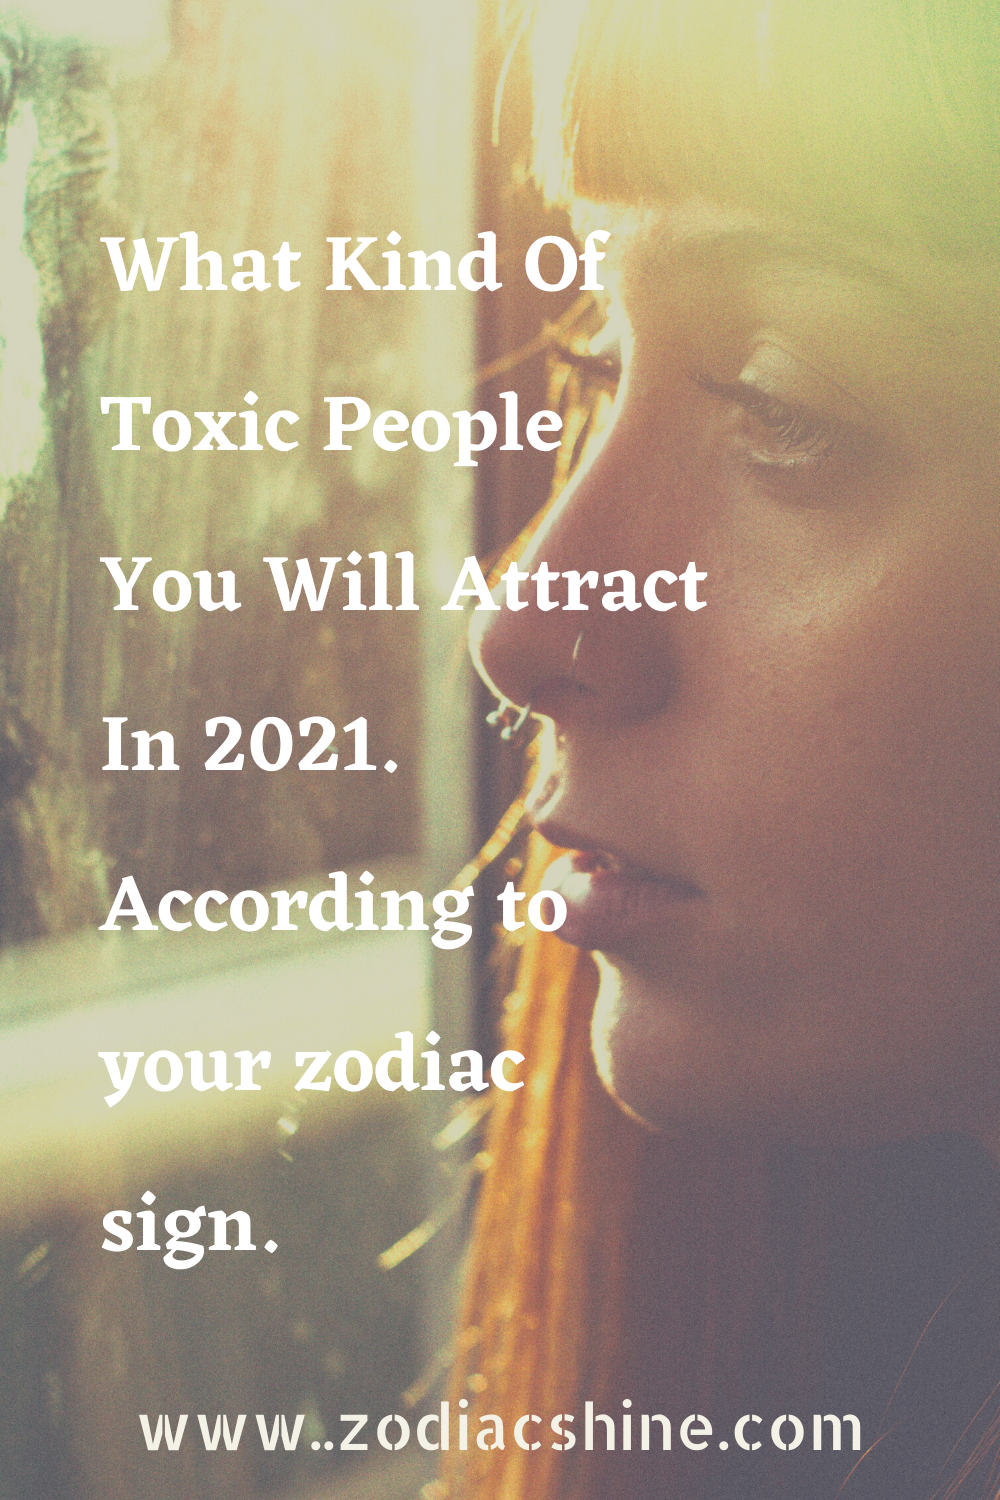 What Kind Of Toxic People You Will Attract In 2021. According to your zodiac sign.